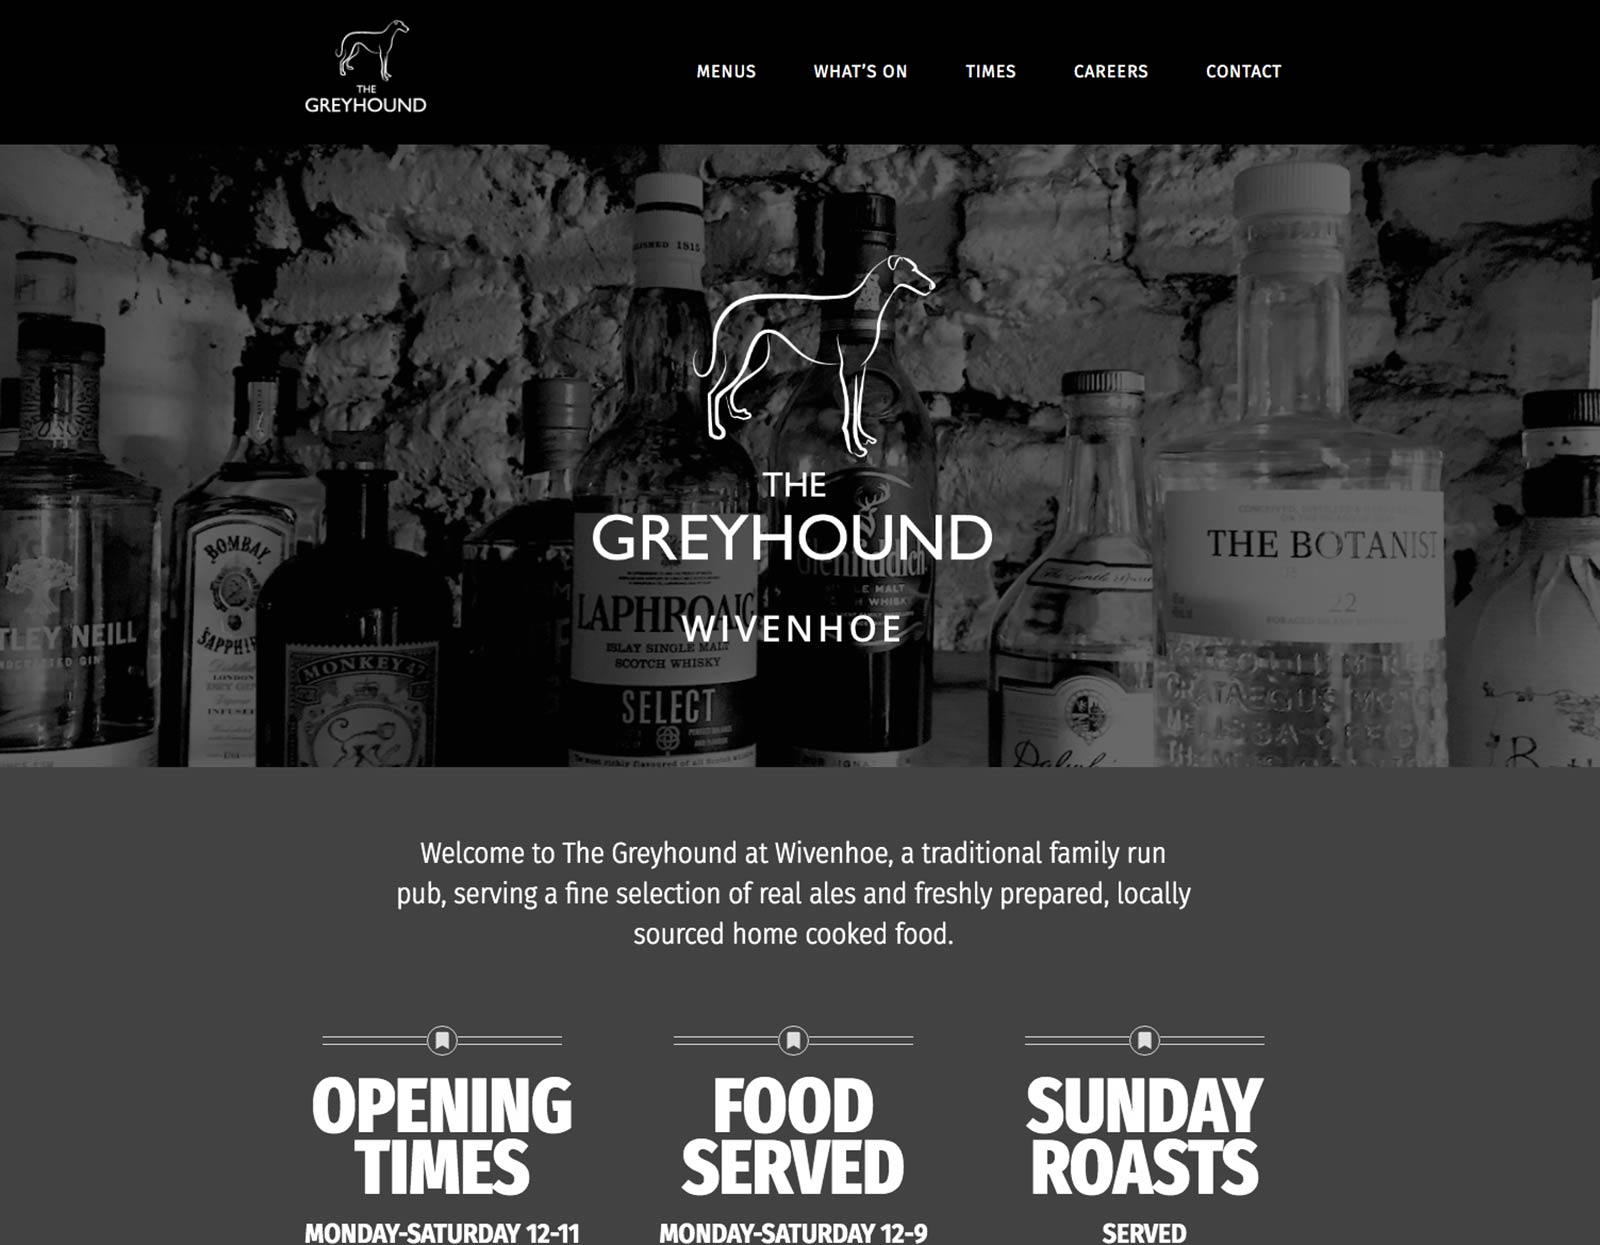 Image of web design for The Greyhound, showing the website home page.